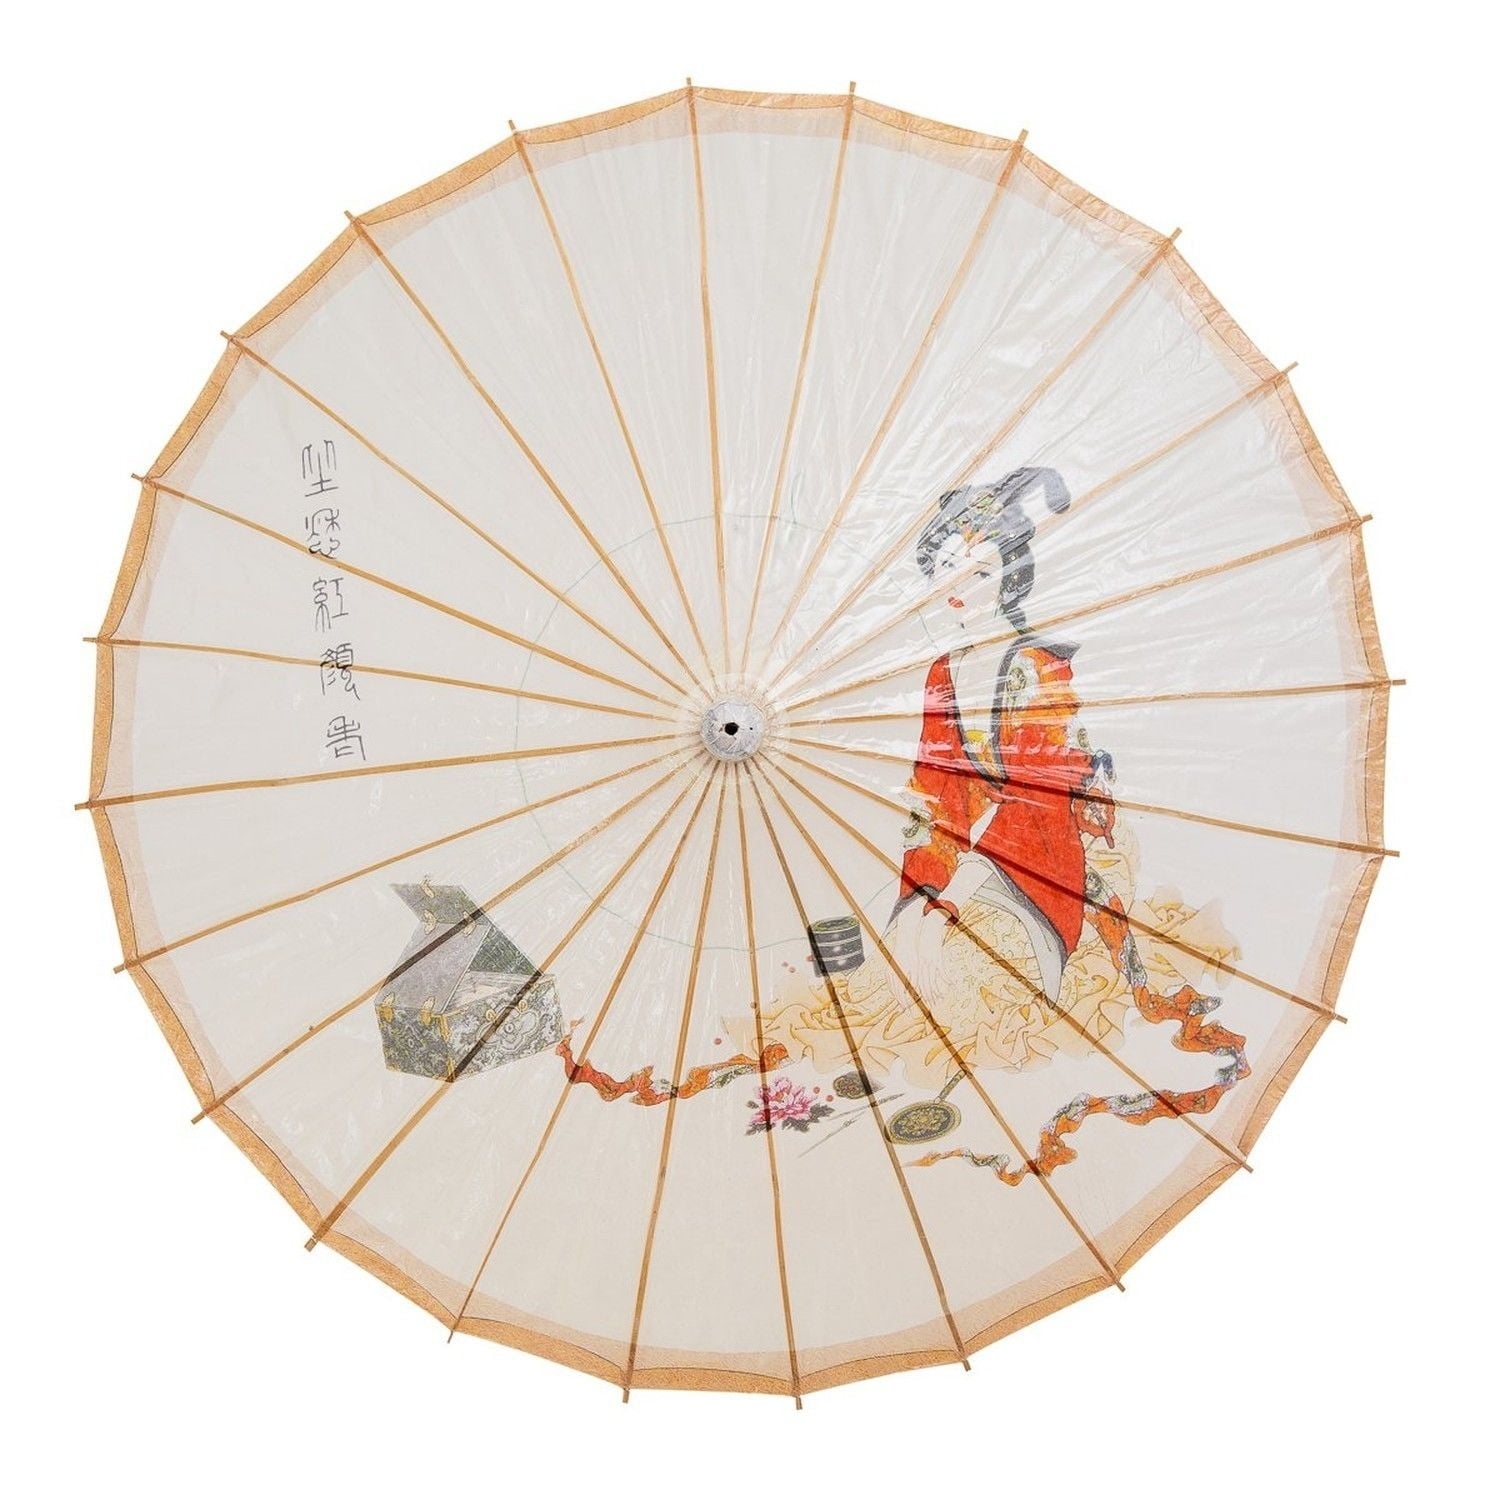 THY COLLECTIBLES Rainproof Handmade Chinese Oiled Paper Umbrella Parasol 33"... 